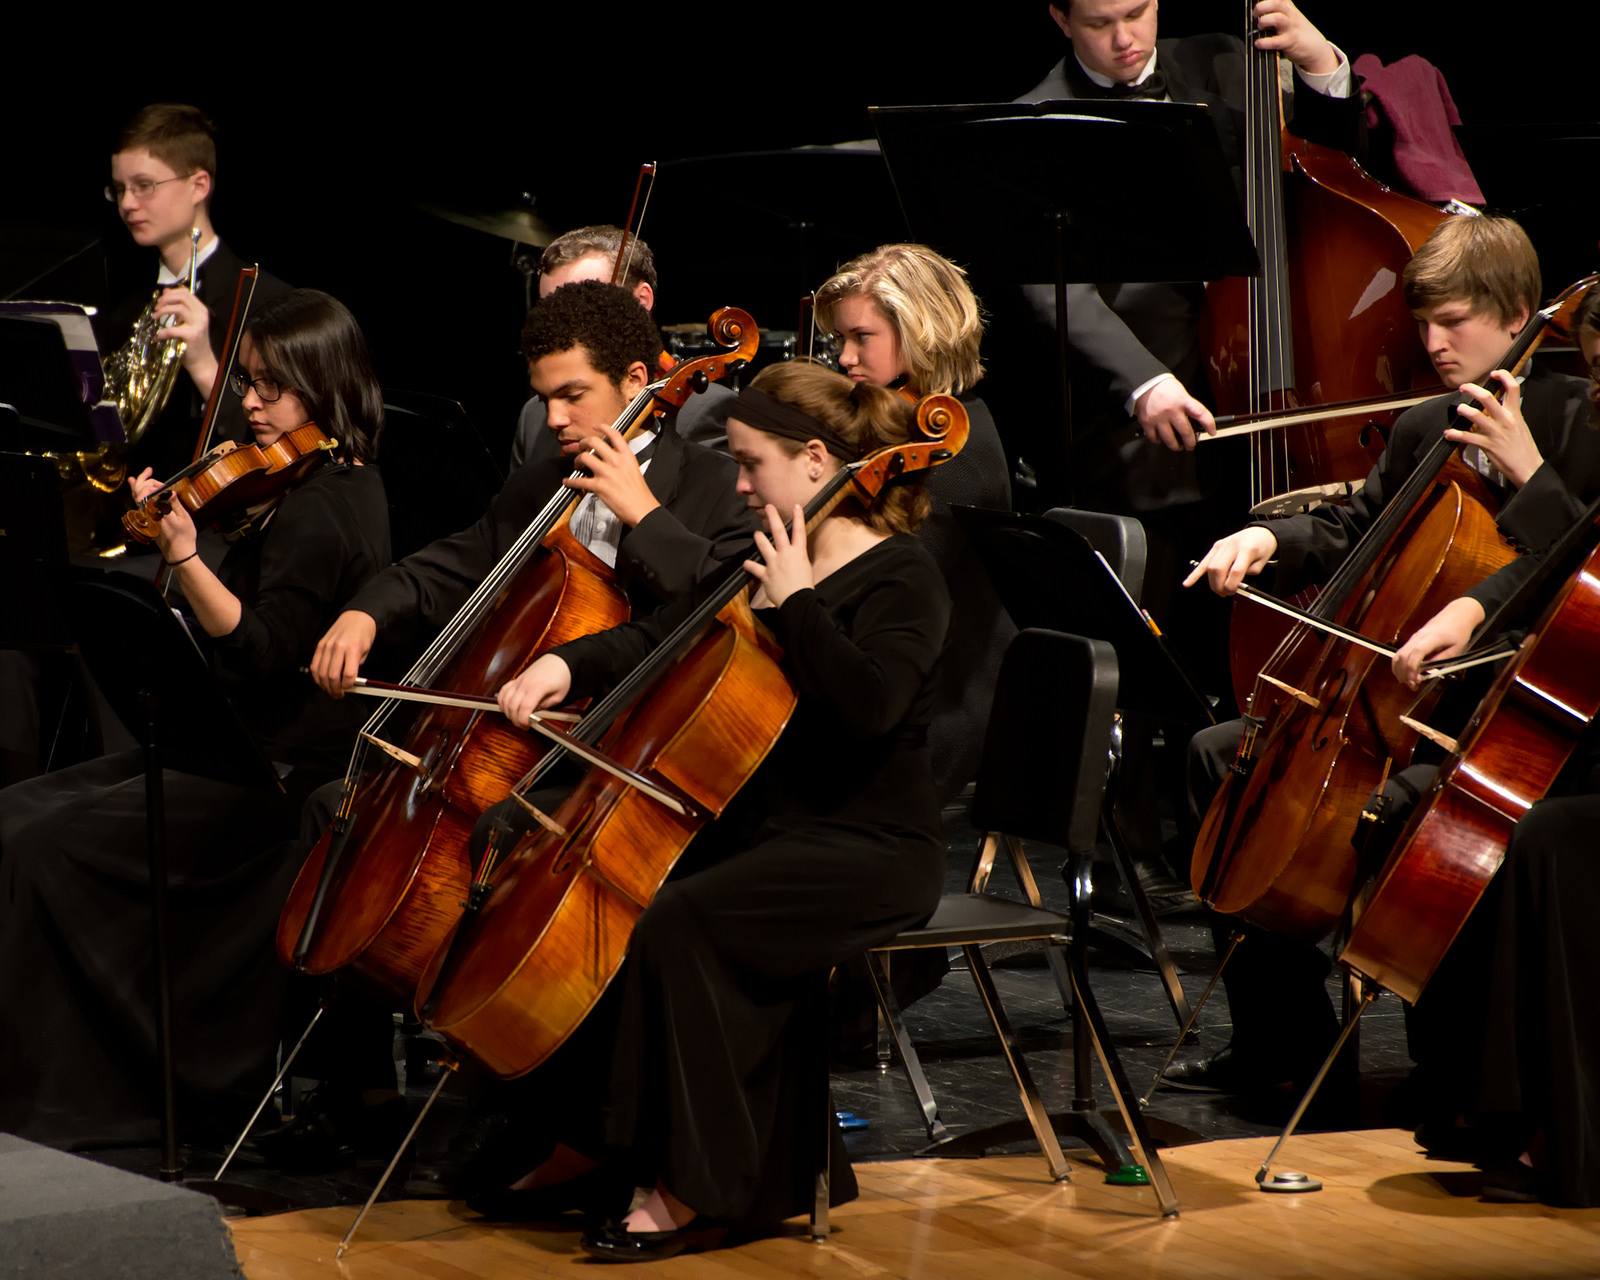 8 Reasons You Should Listen More To Classical Music.